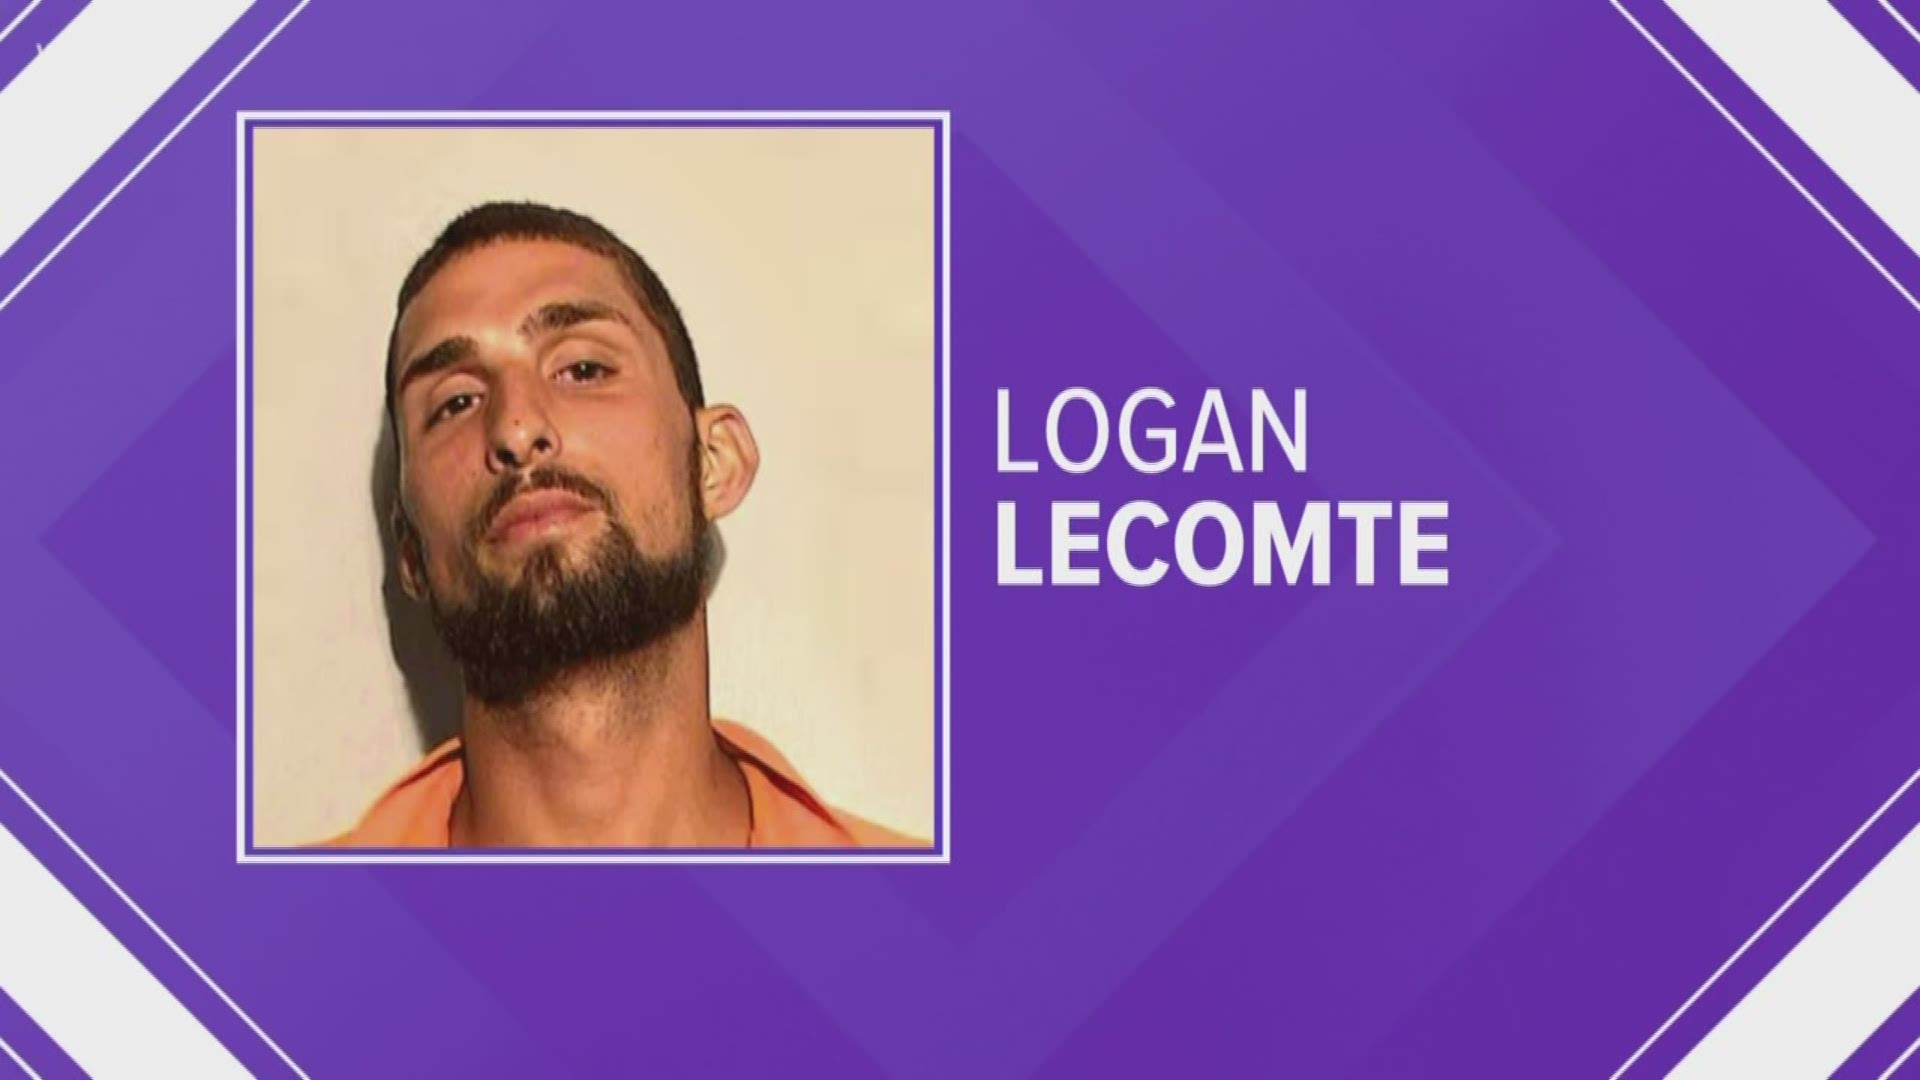 Logan Lecomte, 25, wrestled with an officer while resisting arrest, according to police records.